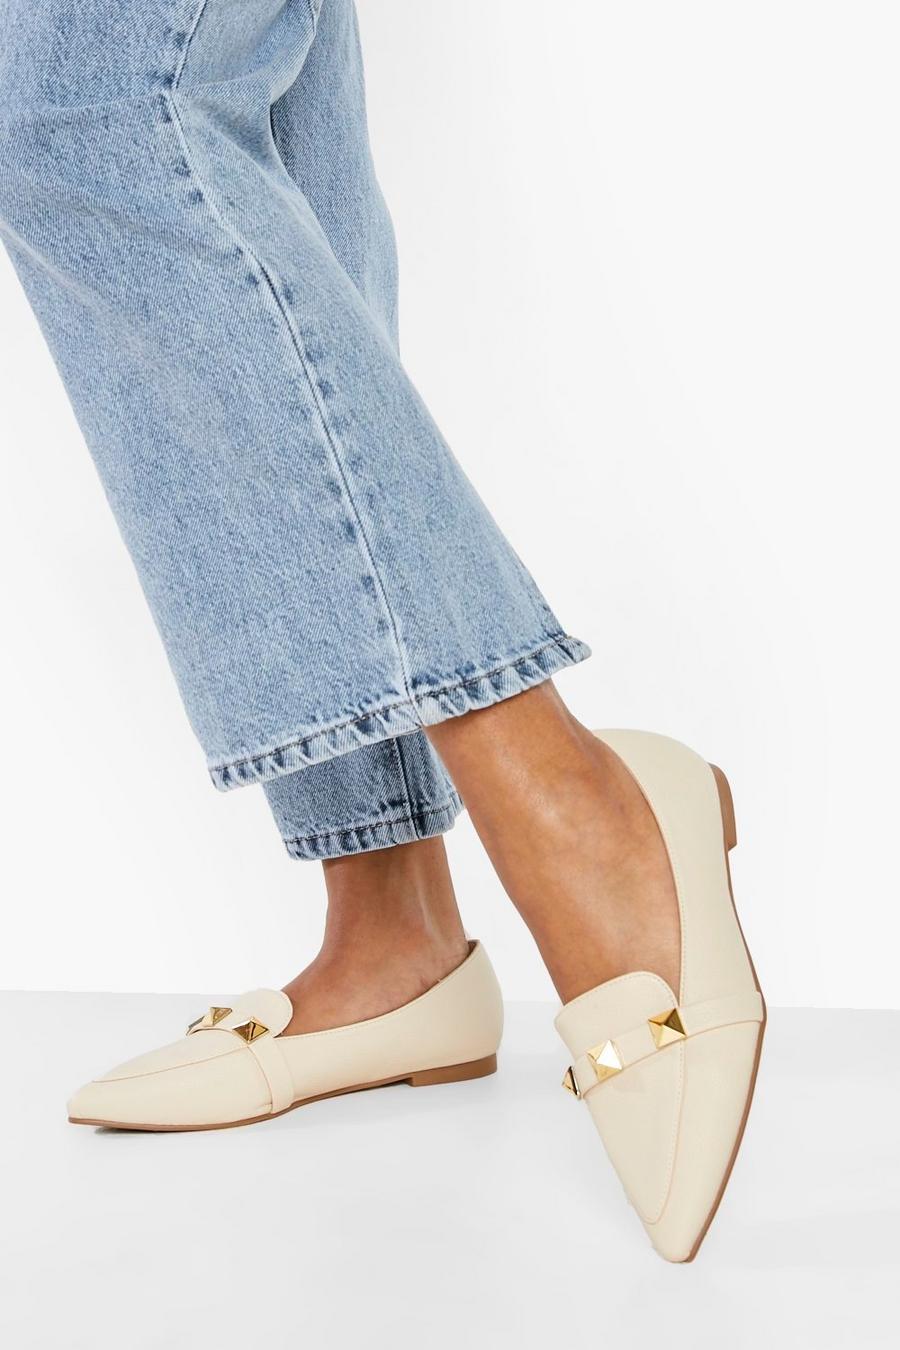 Nude Pointed Toe Stud Detail Ballet Flats